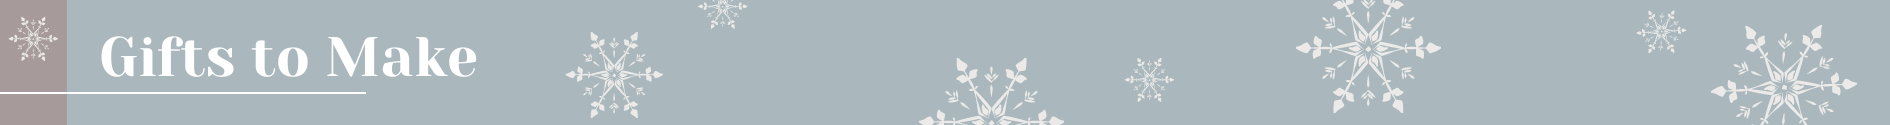 Blue gray header with white snowflakes.